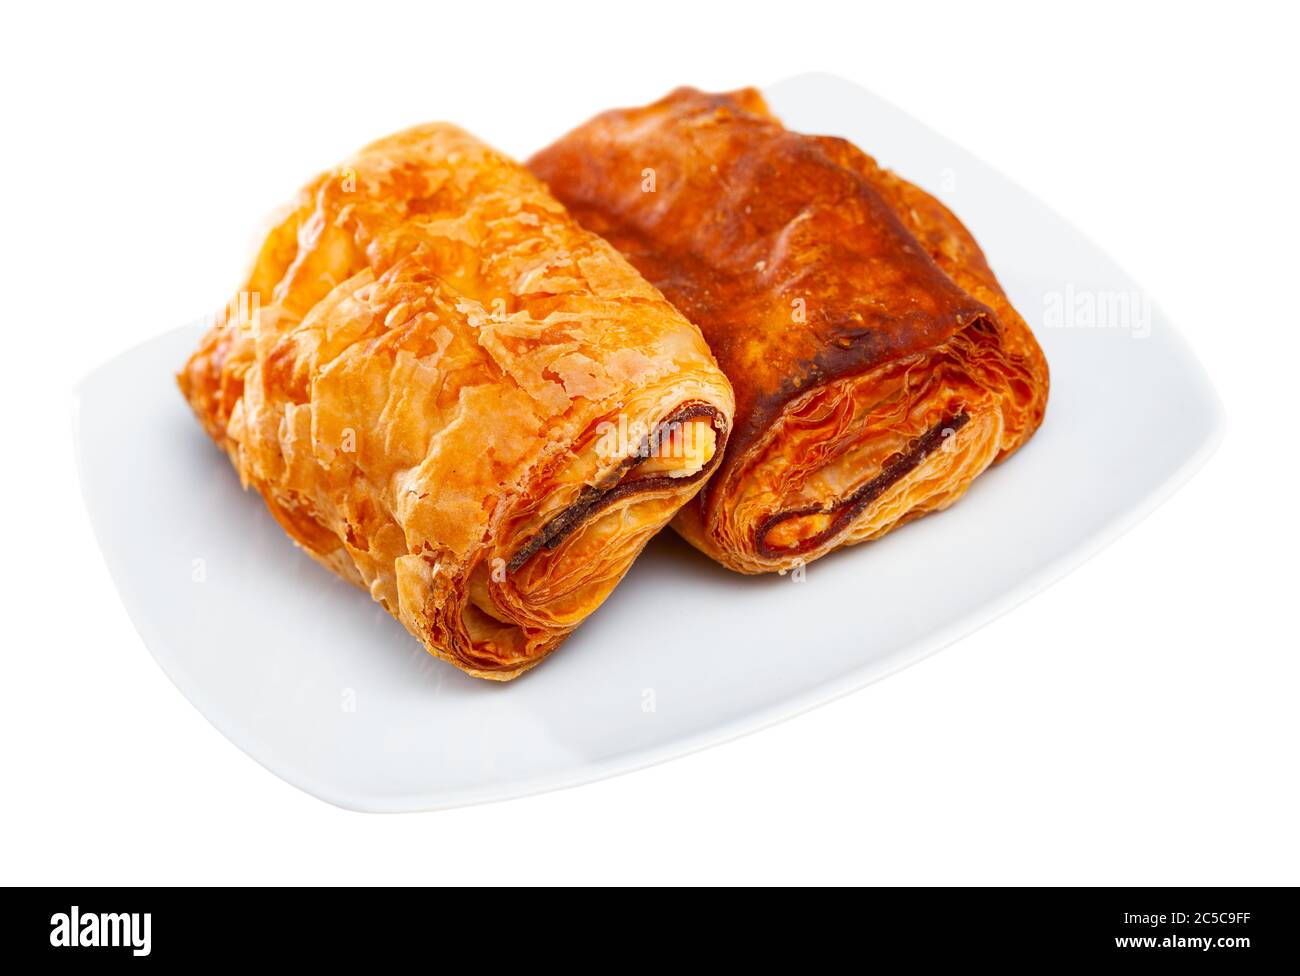 Crispy puff pastry napolitana with meat and cheese filling. Isolated over white background Stock Photo